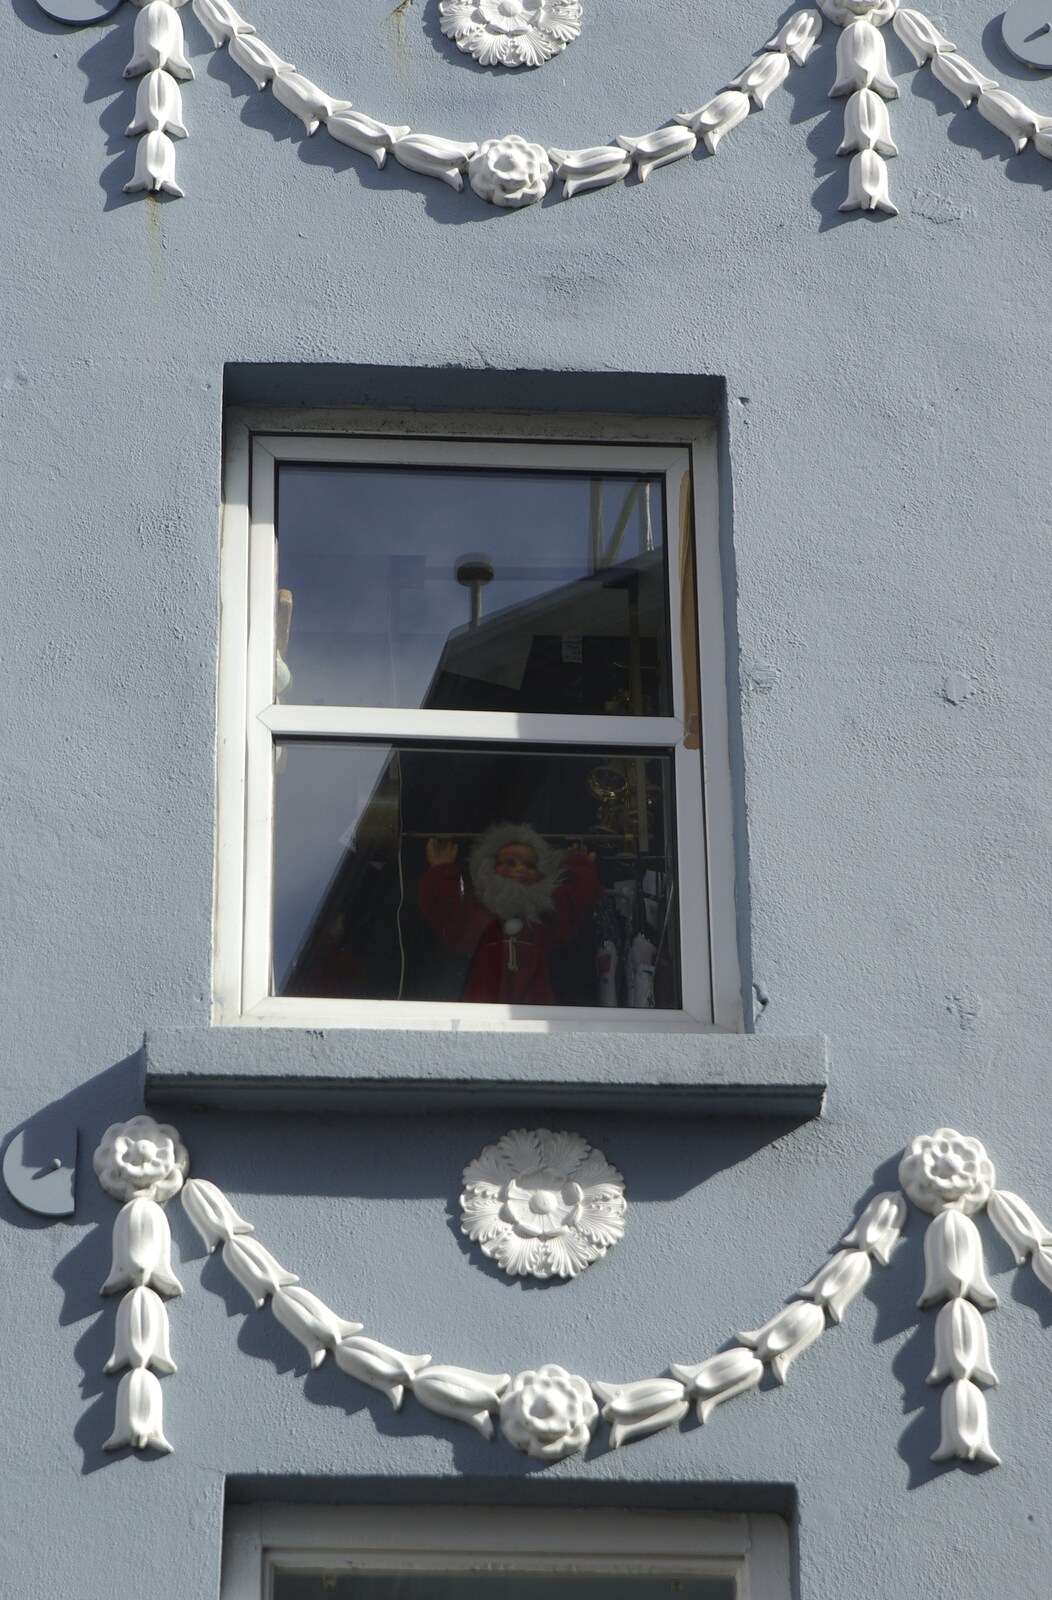 A Santa looks out of a window from Kilkee to Galway, Connacht, Ireland - 23rd September 2007